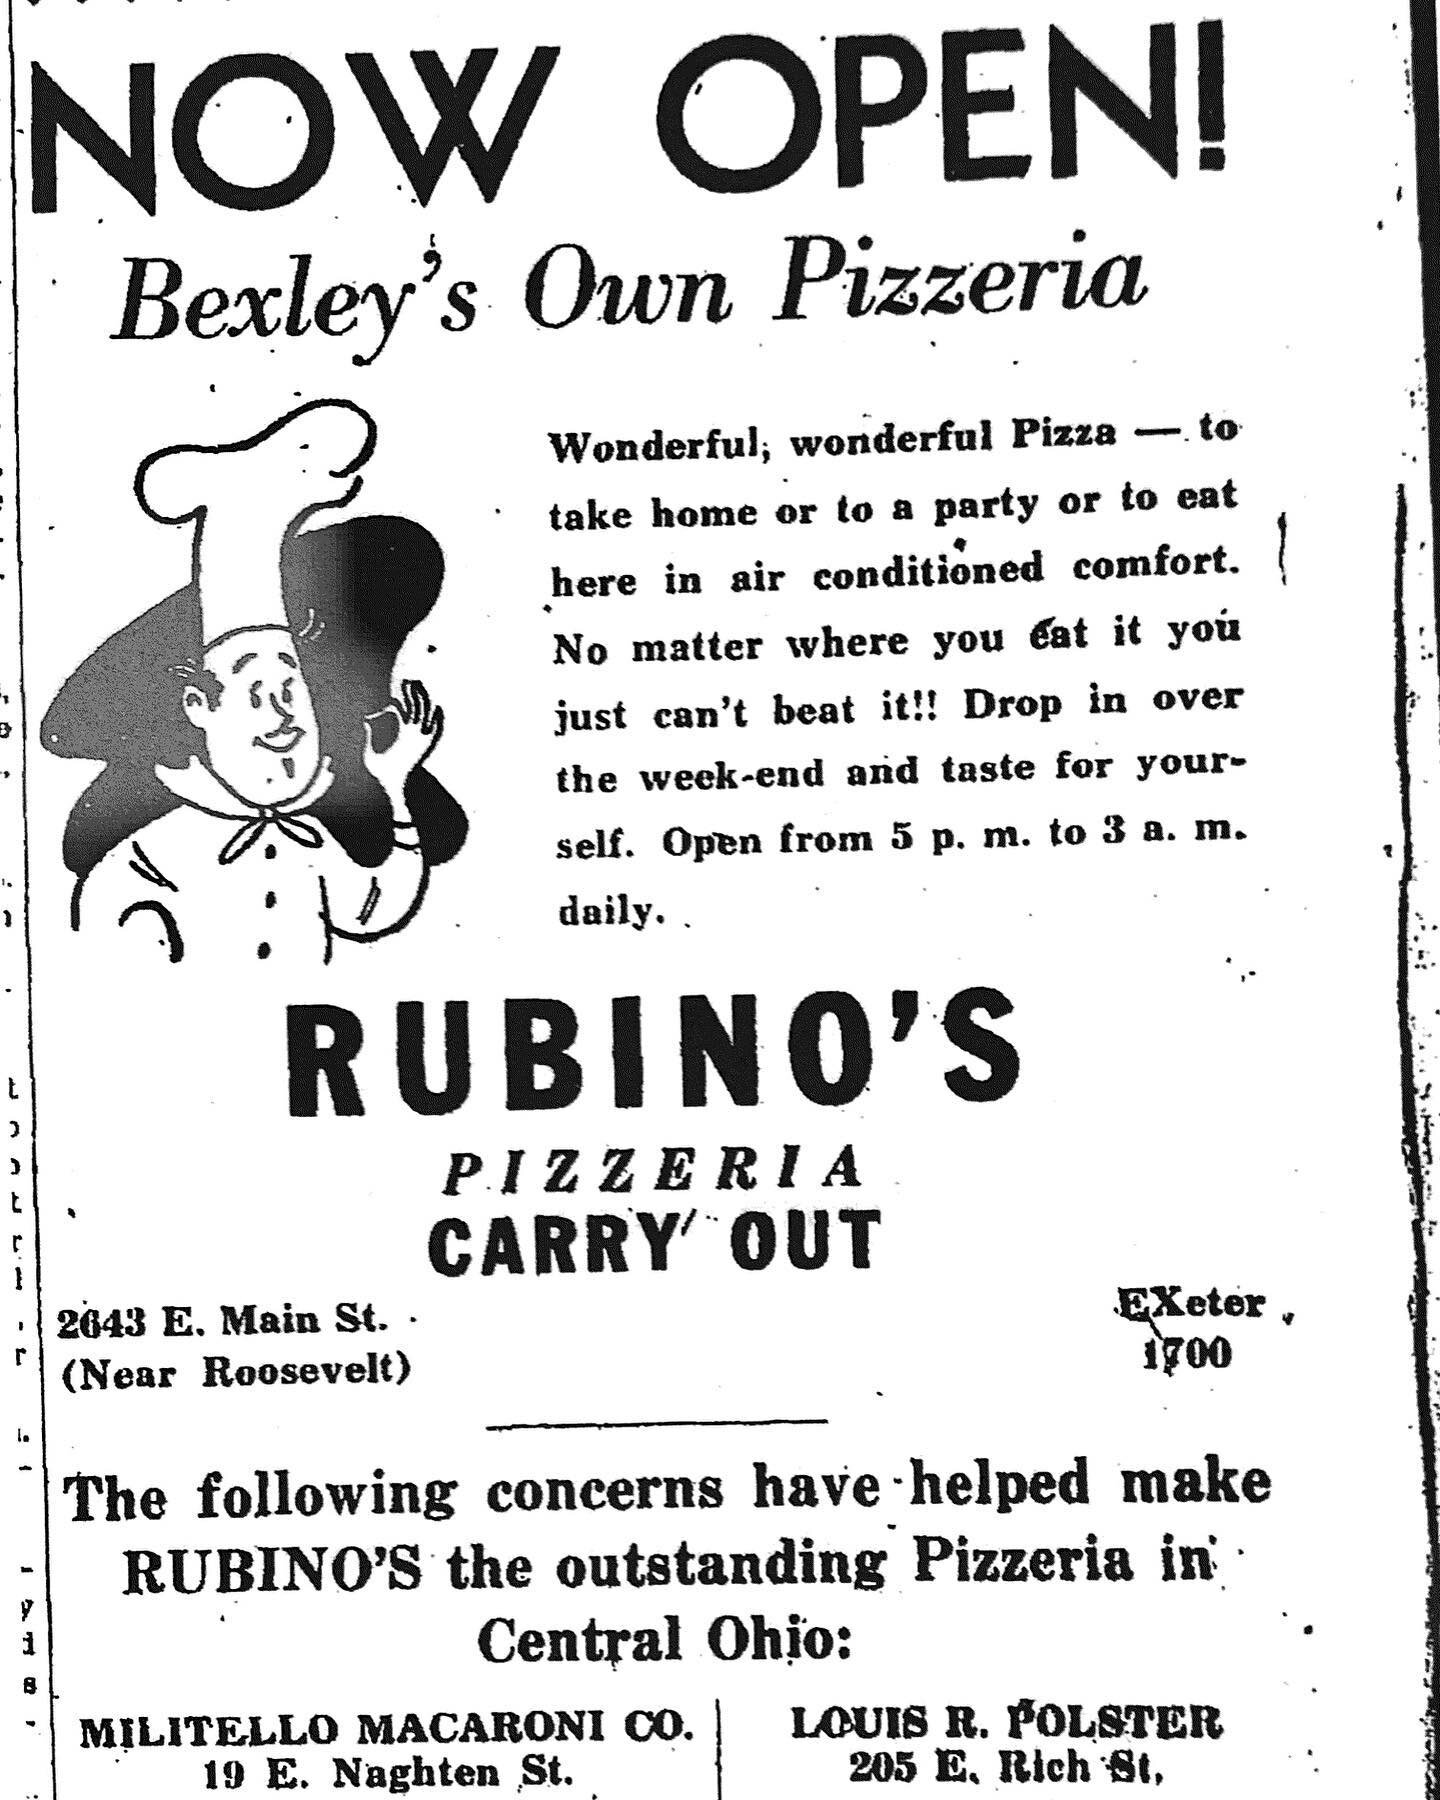 Good morning Bexley! Take a peek at our first EVER advertisement from 1954. We&rsquo;re proud to call Bexley home and plan to stick around for as long as people keep coming, which seems like it will be forever! 
.
.
.
#bexleyohio #columbuspizza #colu